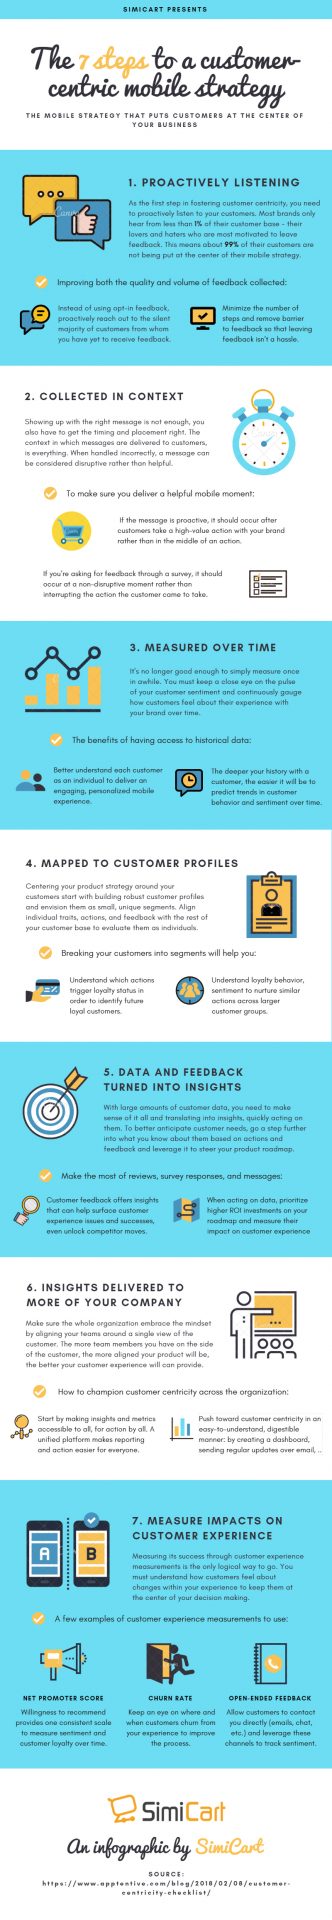 The 7 steps to a customer-centric mobile strategy [infographic]